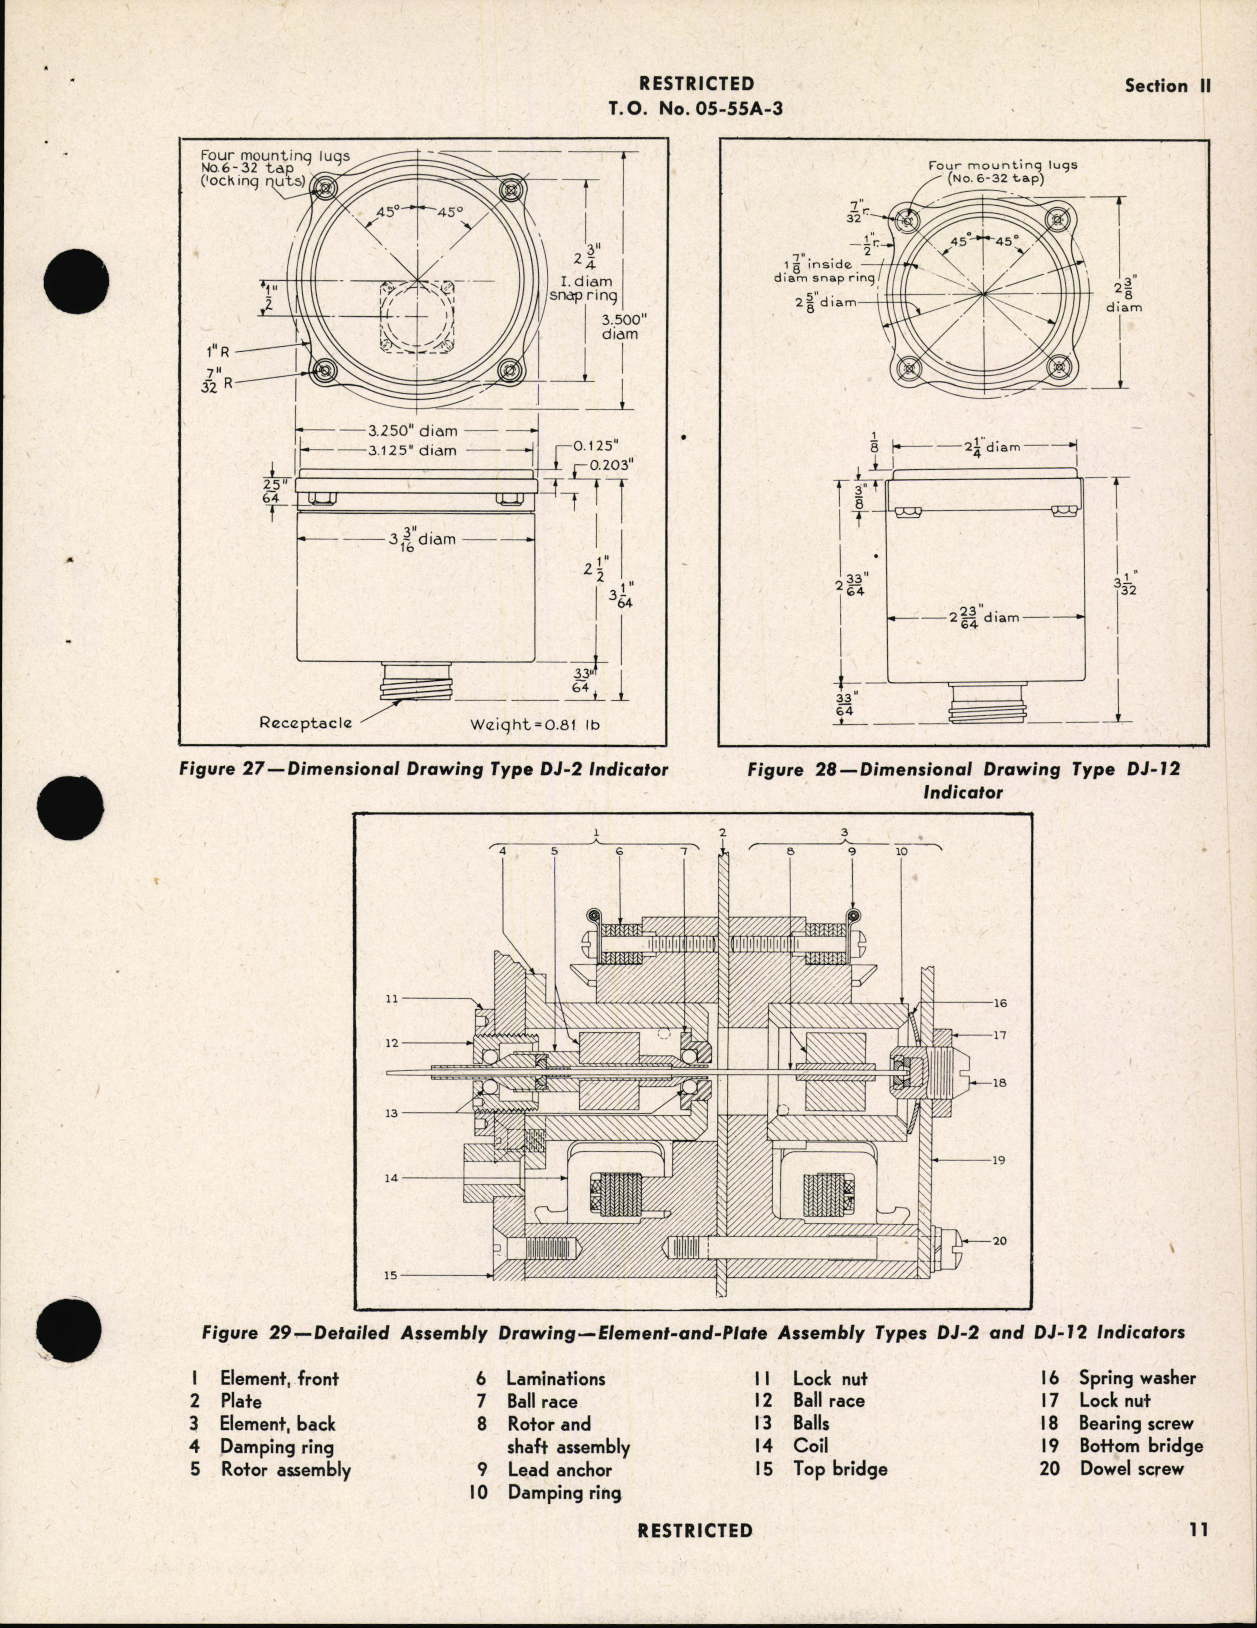 Sample page 5 from AirCorps Library document: Handbook of Instructions with Parts Catalog for D-C Selsyn Fuel Level Gages